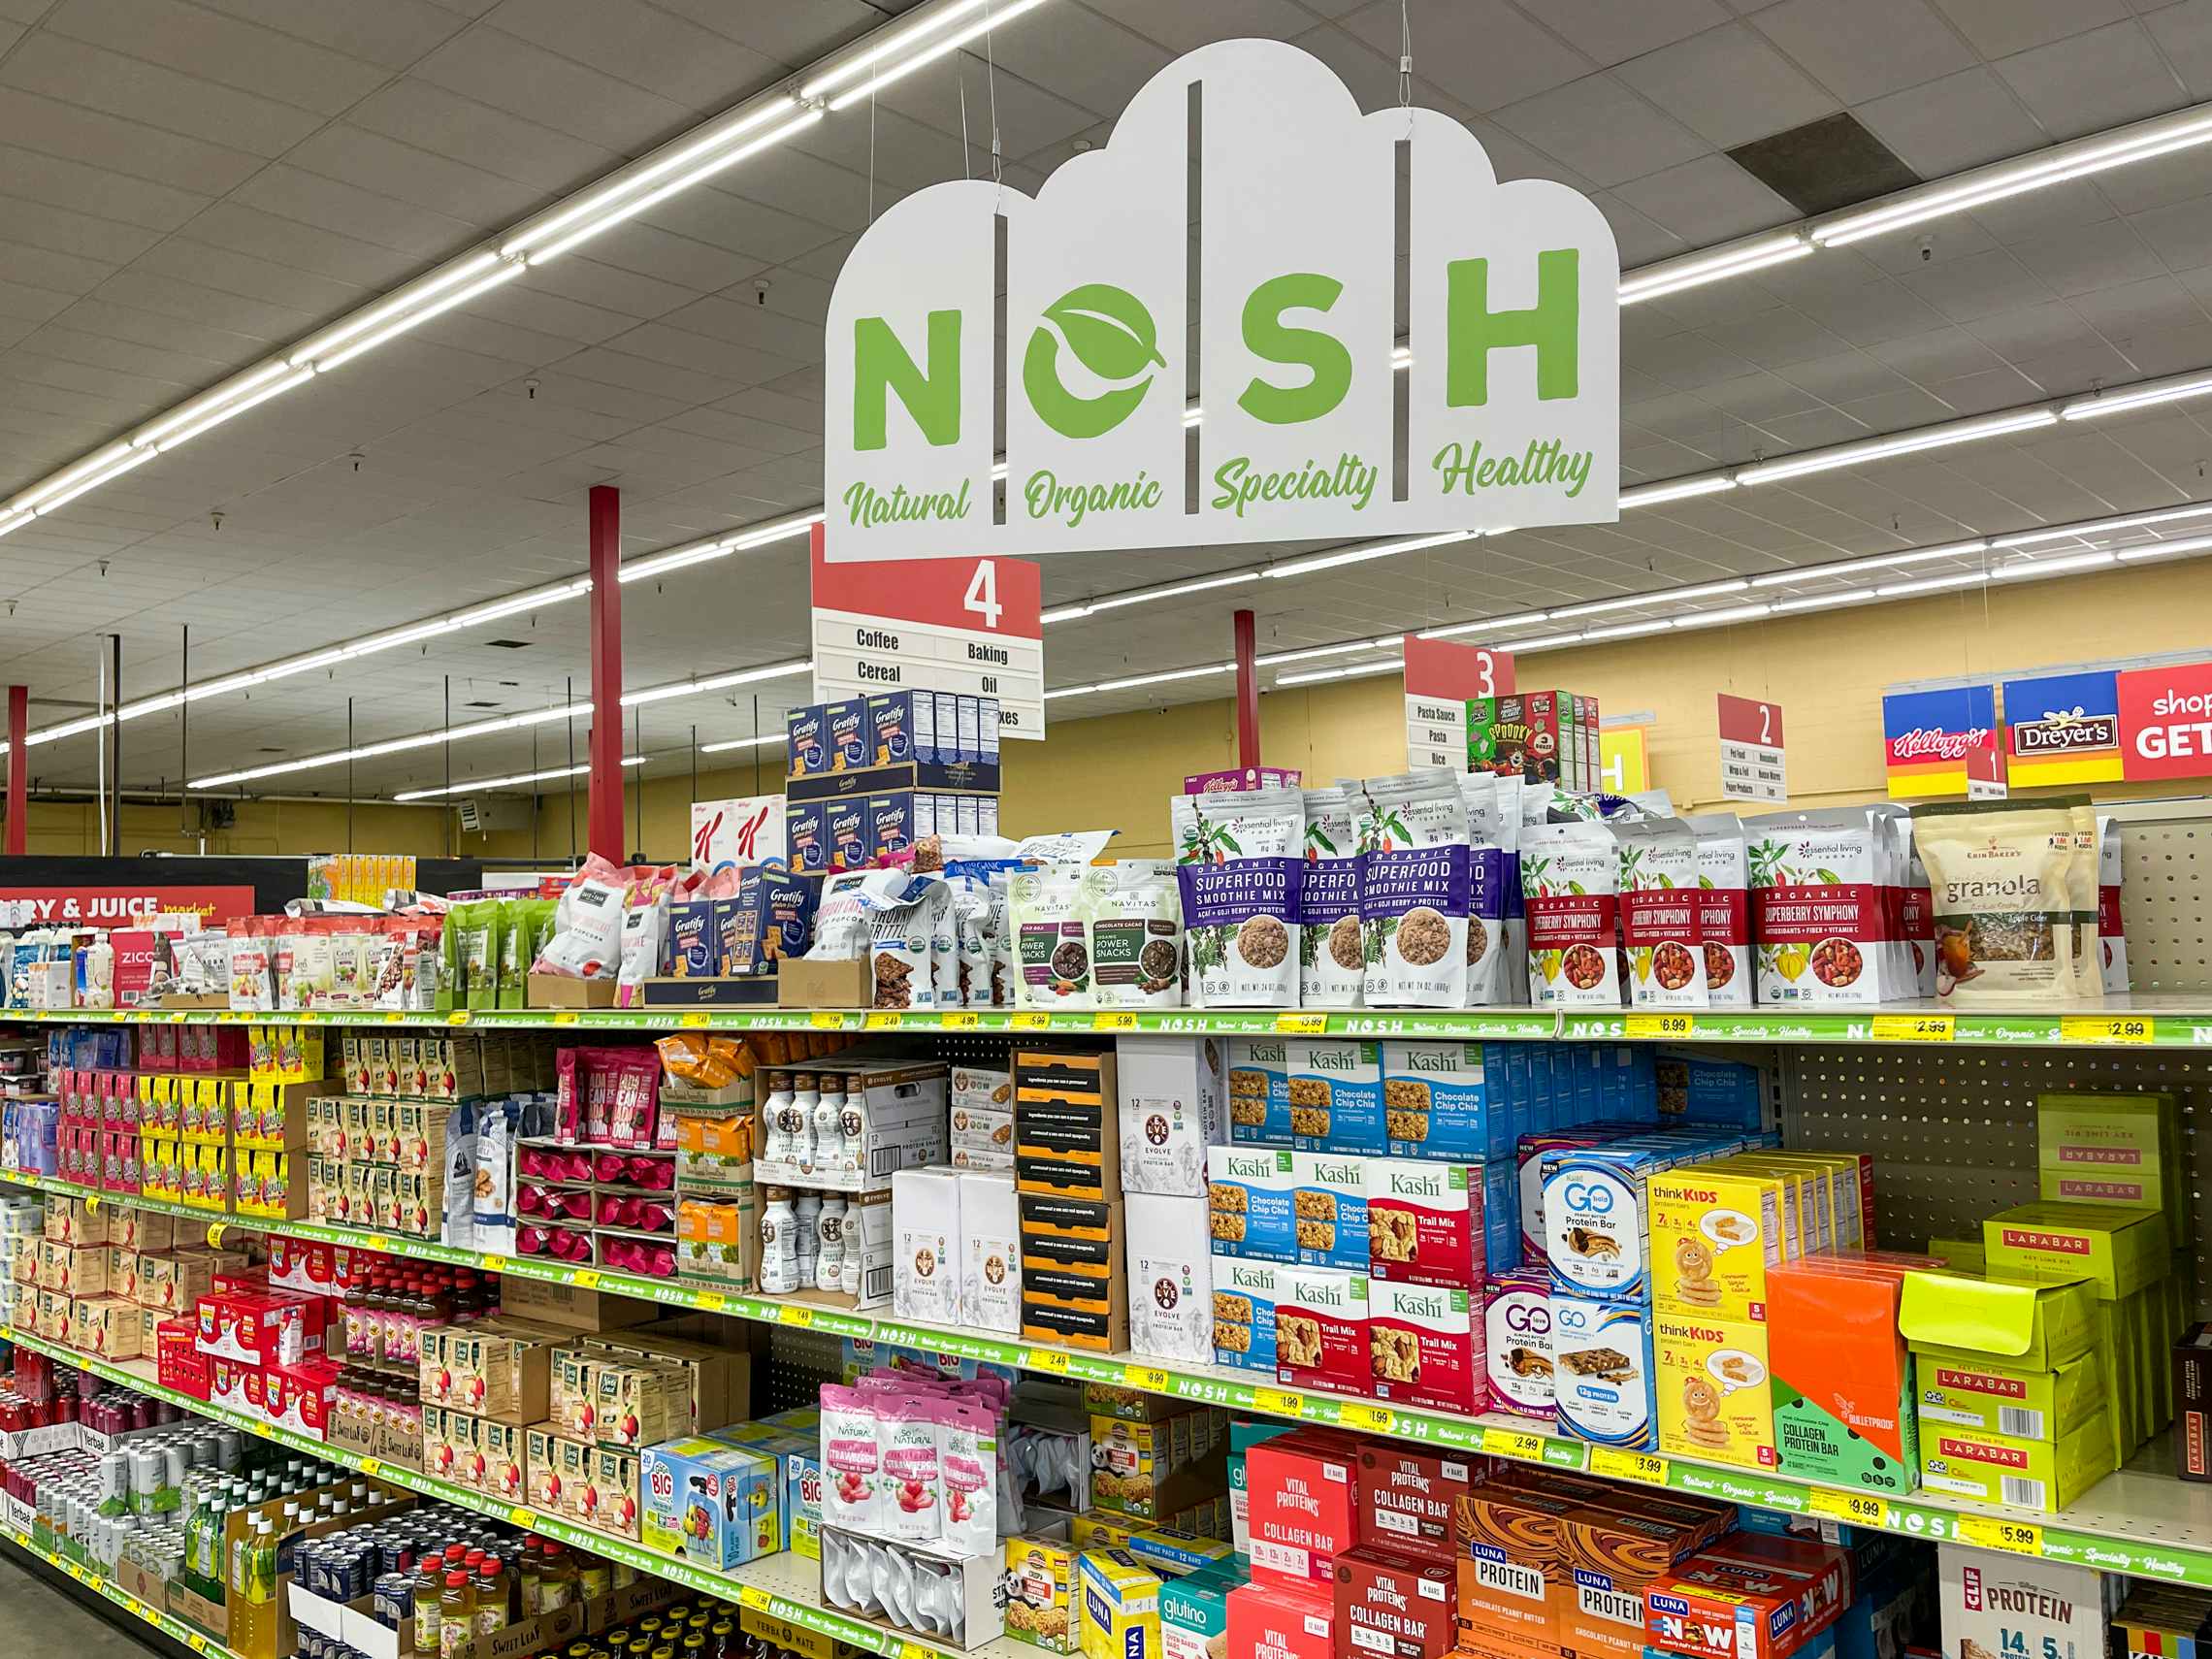 NOSH sign and products inside Grocery Outlet